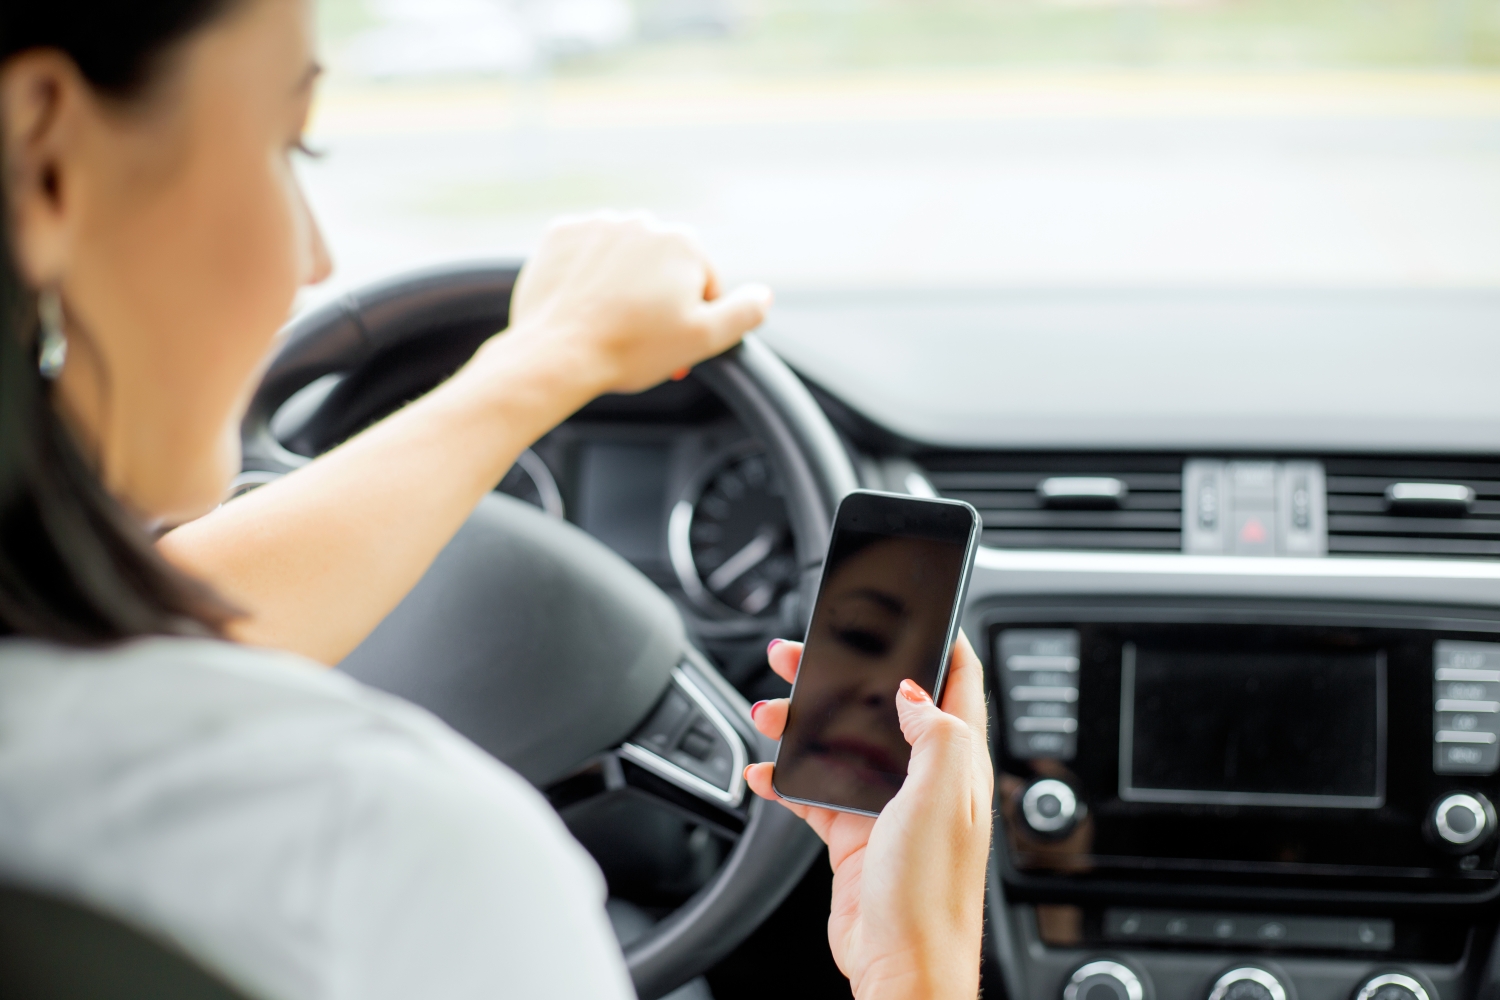 Sending a text message or answering a phone call while driving is both careless and irresponsible